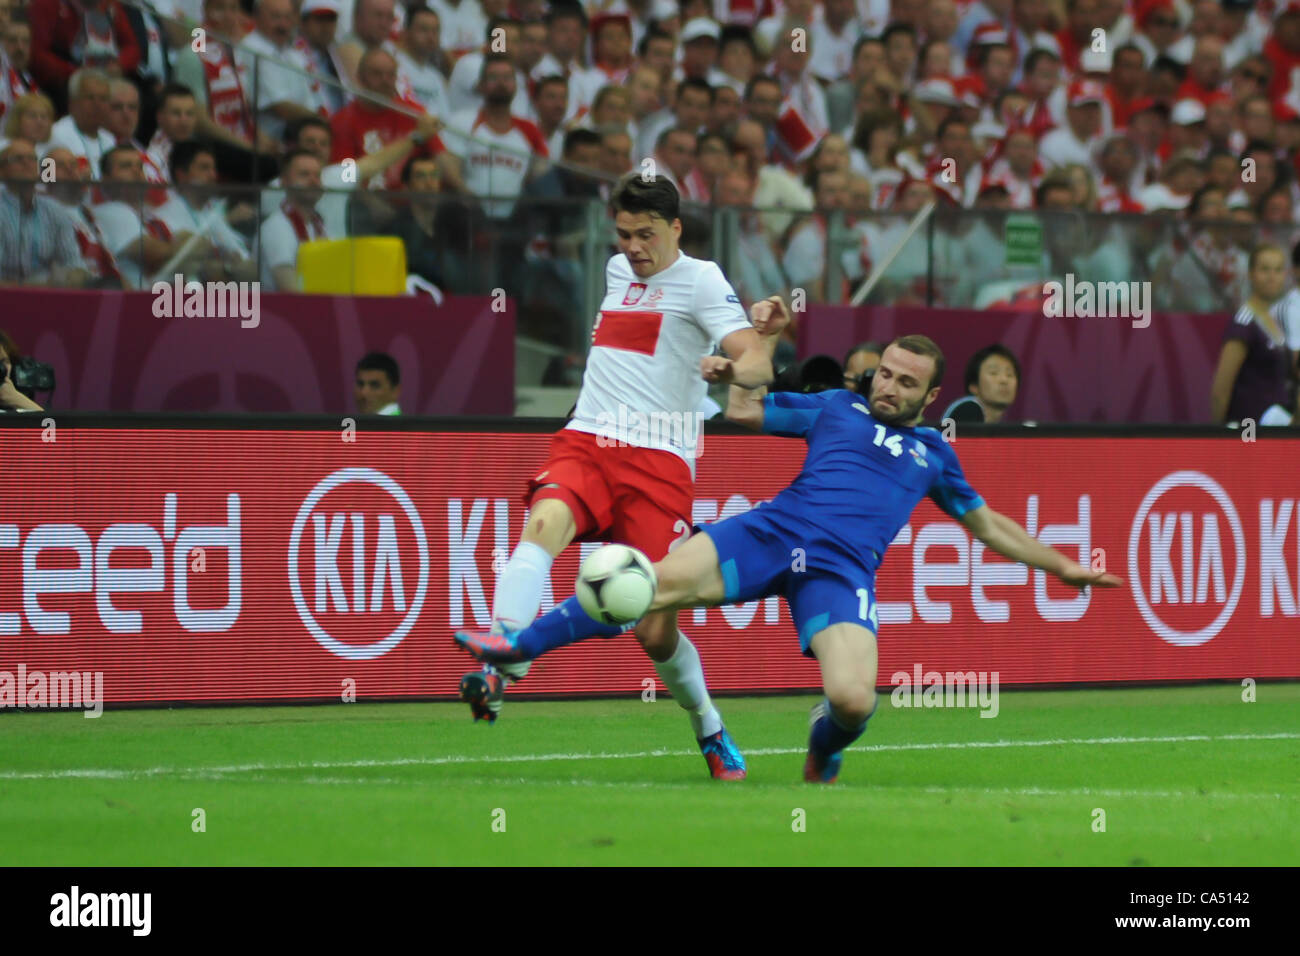 08.06.2012 Warsaw, Poland. Sebastian Boenisch (SV Werder Bremen) in action for Poland and Dimitris Salpingidis (PAOK FC) in action for Greece during the European Championship Group A game between Poland and Greece from the National Stadium. Stock Photo